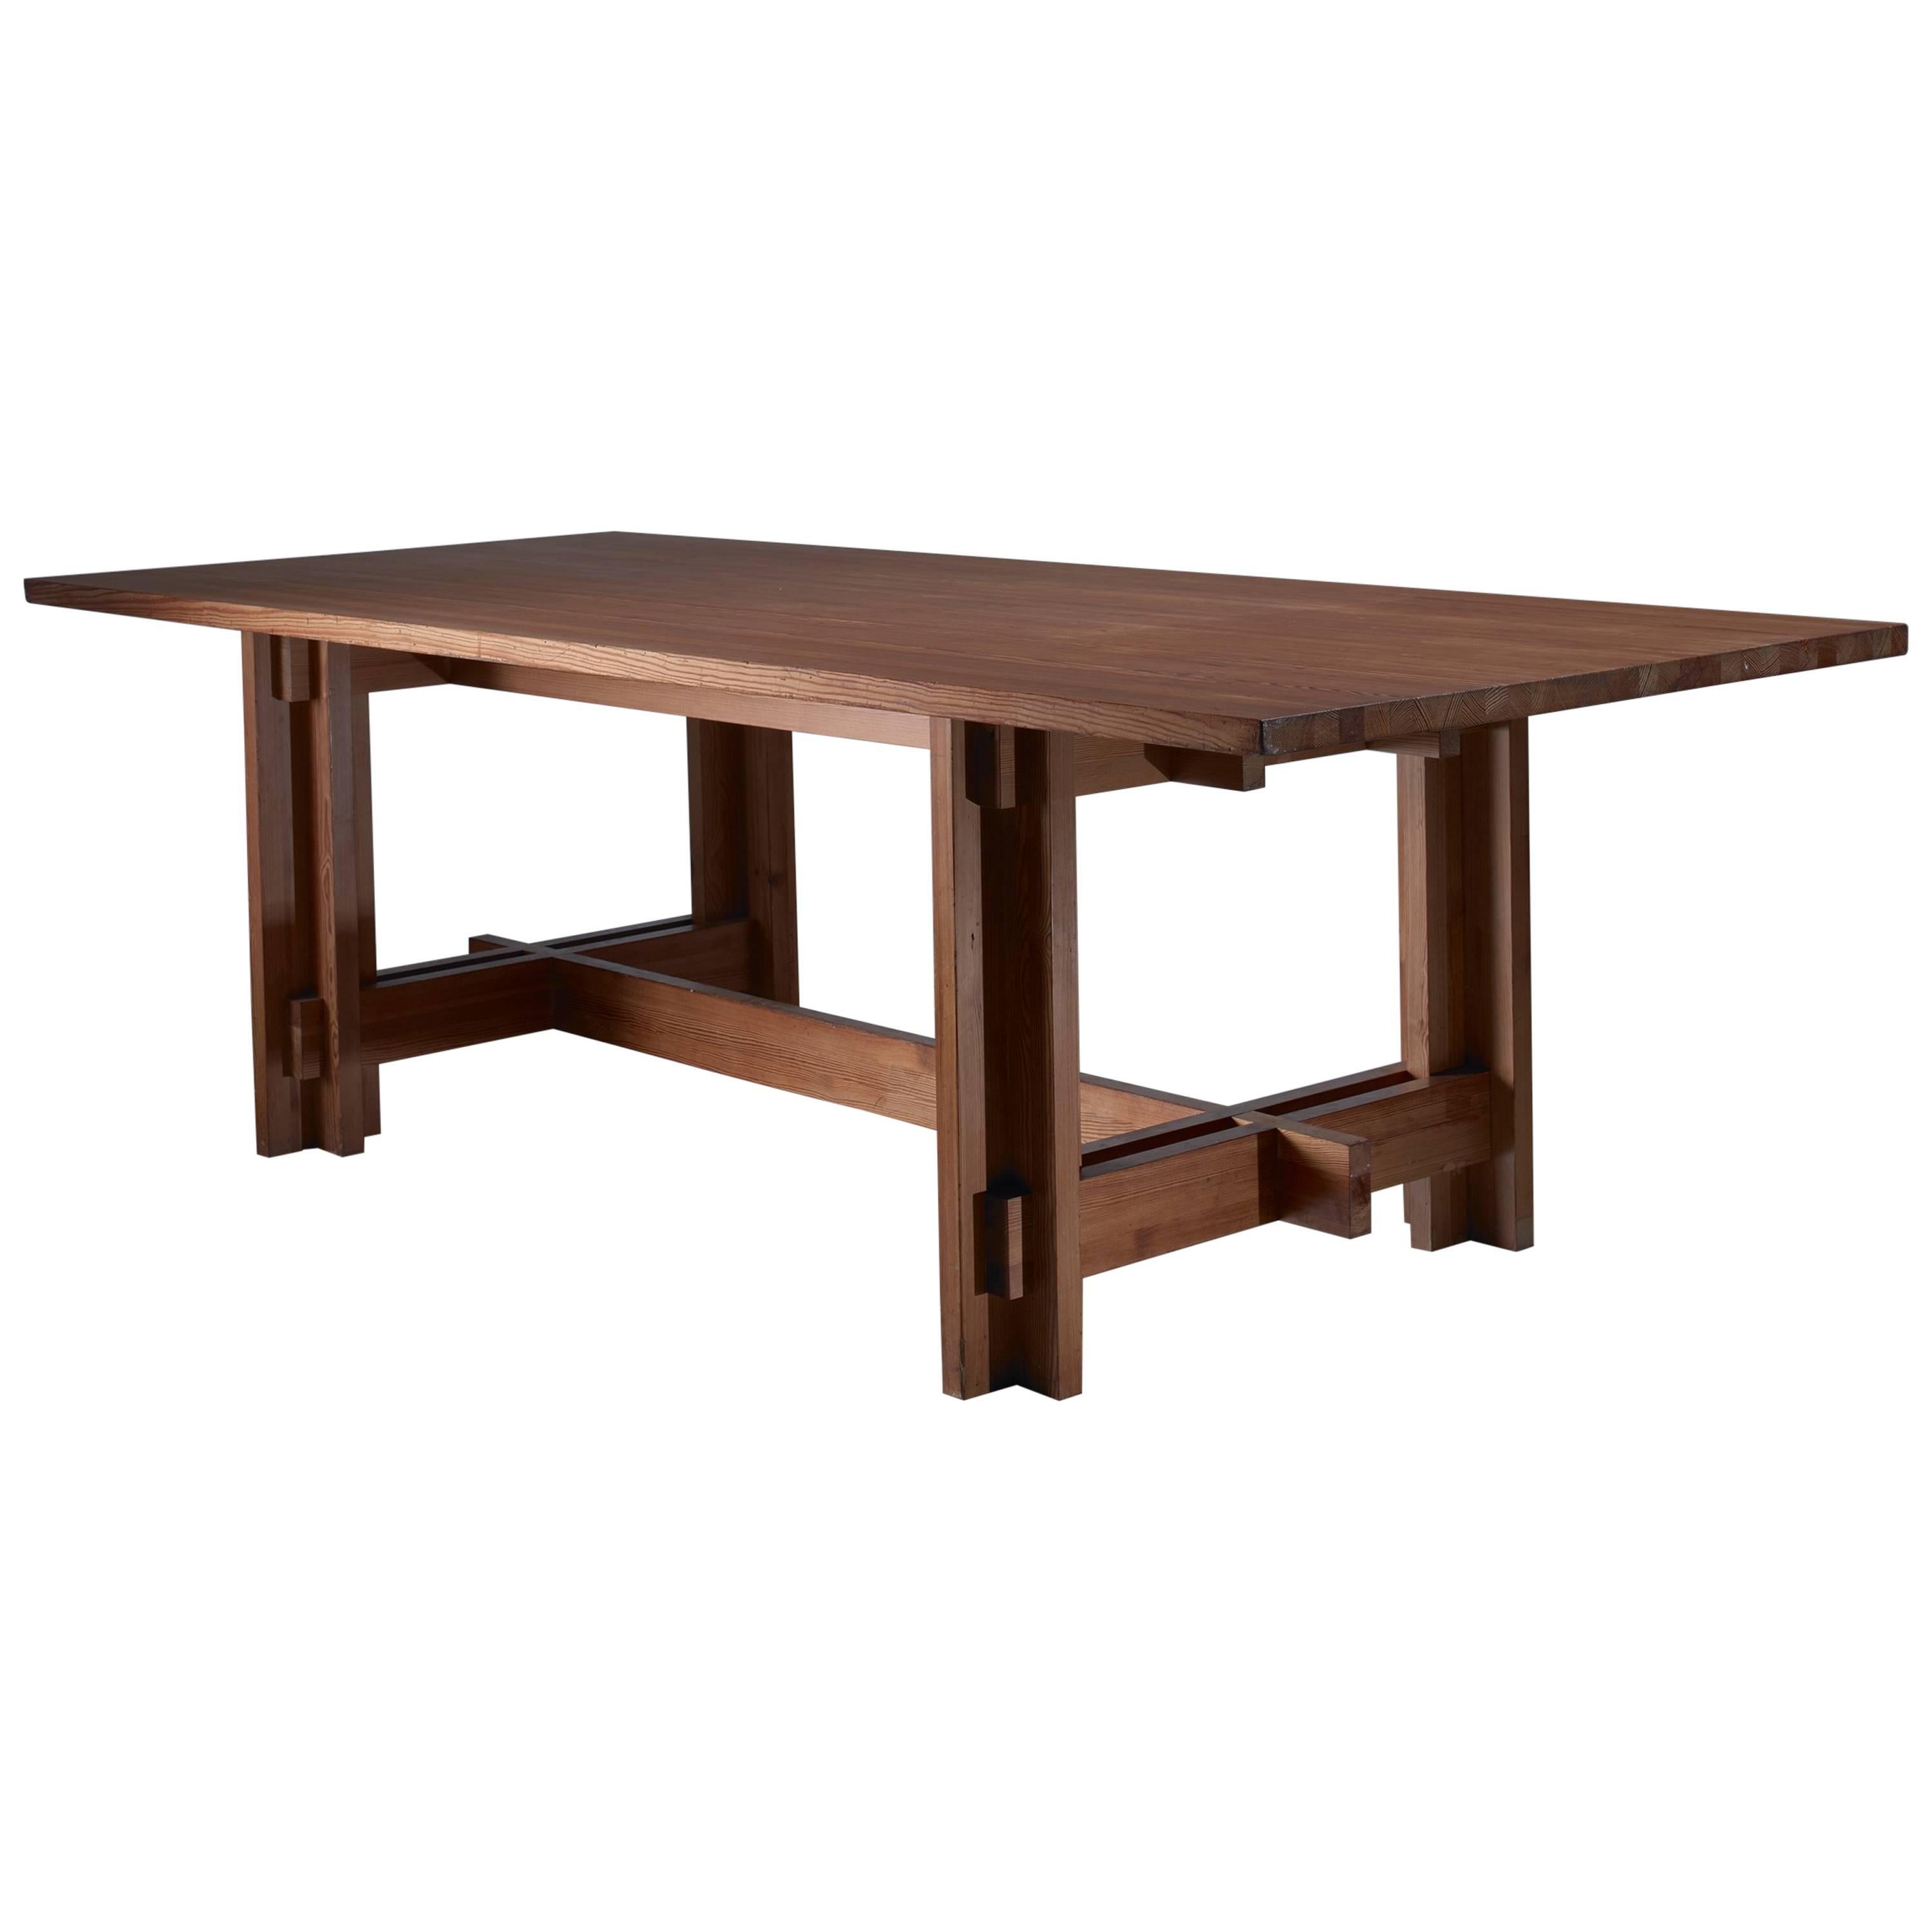 Peter Schmid Architectural Pine Dining Table, Austria, 1960s For Sale